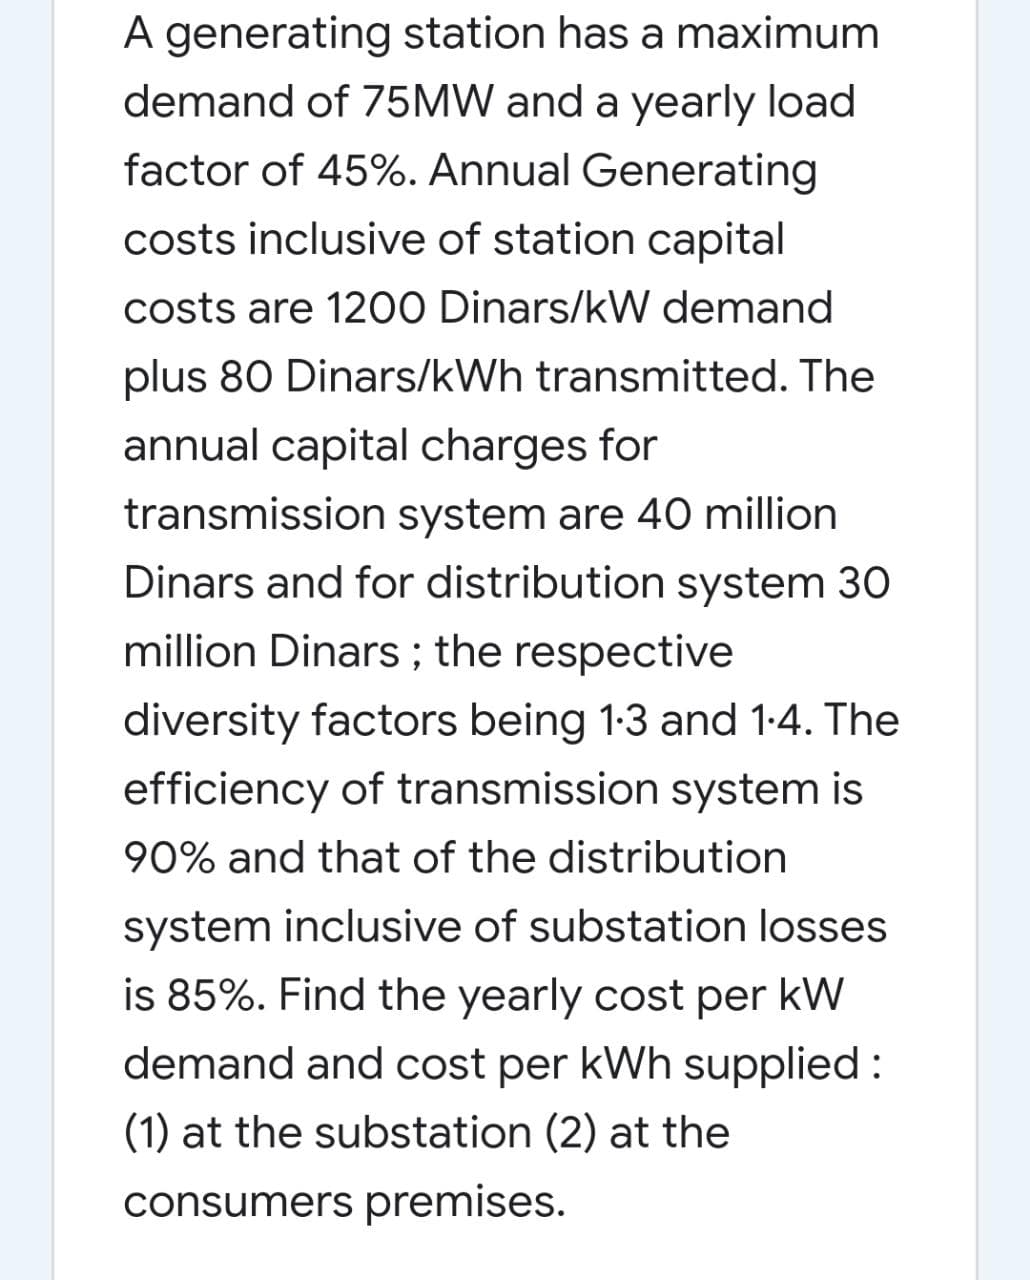 A generating station has a maximum
demand of 75MW and a yearly load
factor of 45%. Annual Generating
costs inclusive of station capital
costs are 1200 Dinars/kW demand
plus 80 Dinars/kWh transmitted. The
annual capital charges for
transmission system are 40 million
Dinars and for distribution system 30
million Dinars ; the respective
diversity factors being 1:3 and 1-4. The
efficiency of transmission system is
90% and that of the distribution
system inclusive of substation losses
is 85%. Find the yearly cost per kW
demand and cost per kWh supplied :
(1) at the substation (2) at the
consumers premises.
